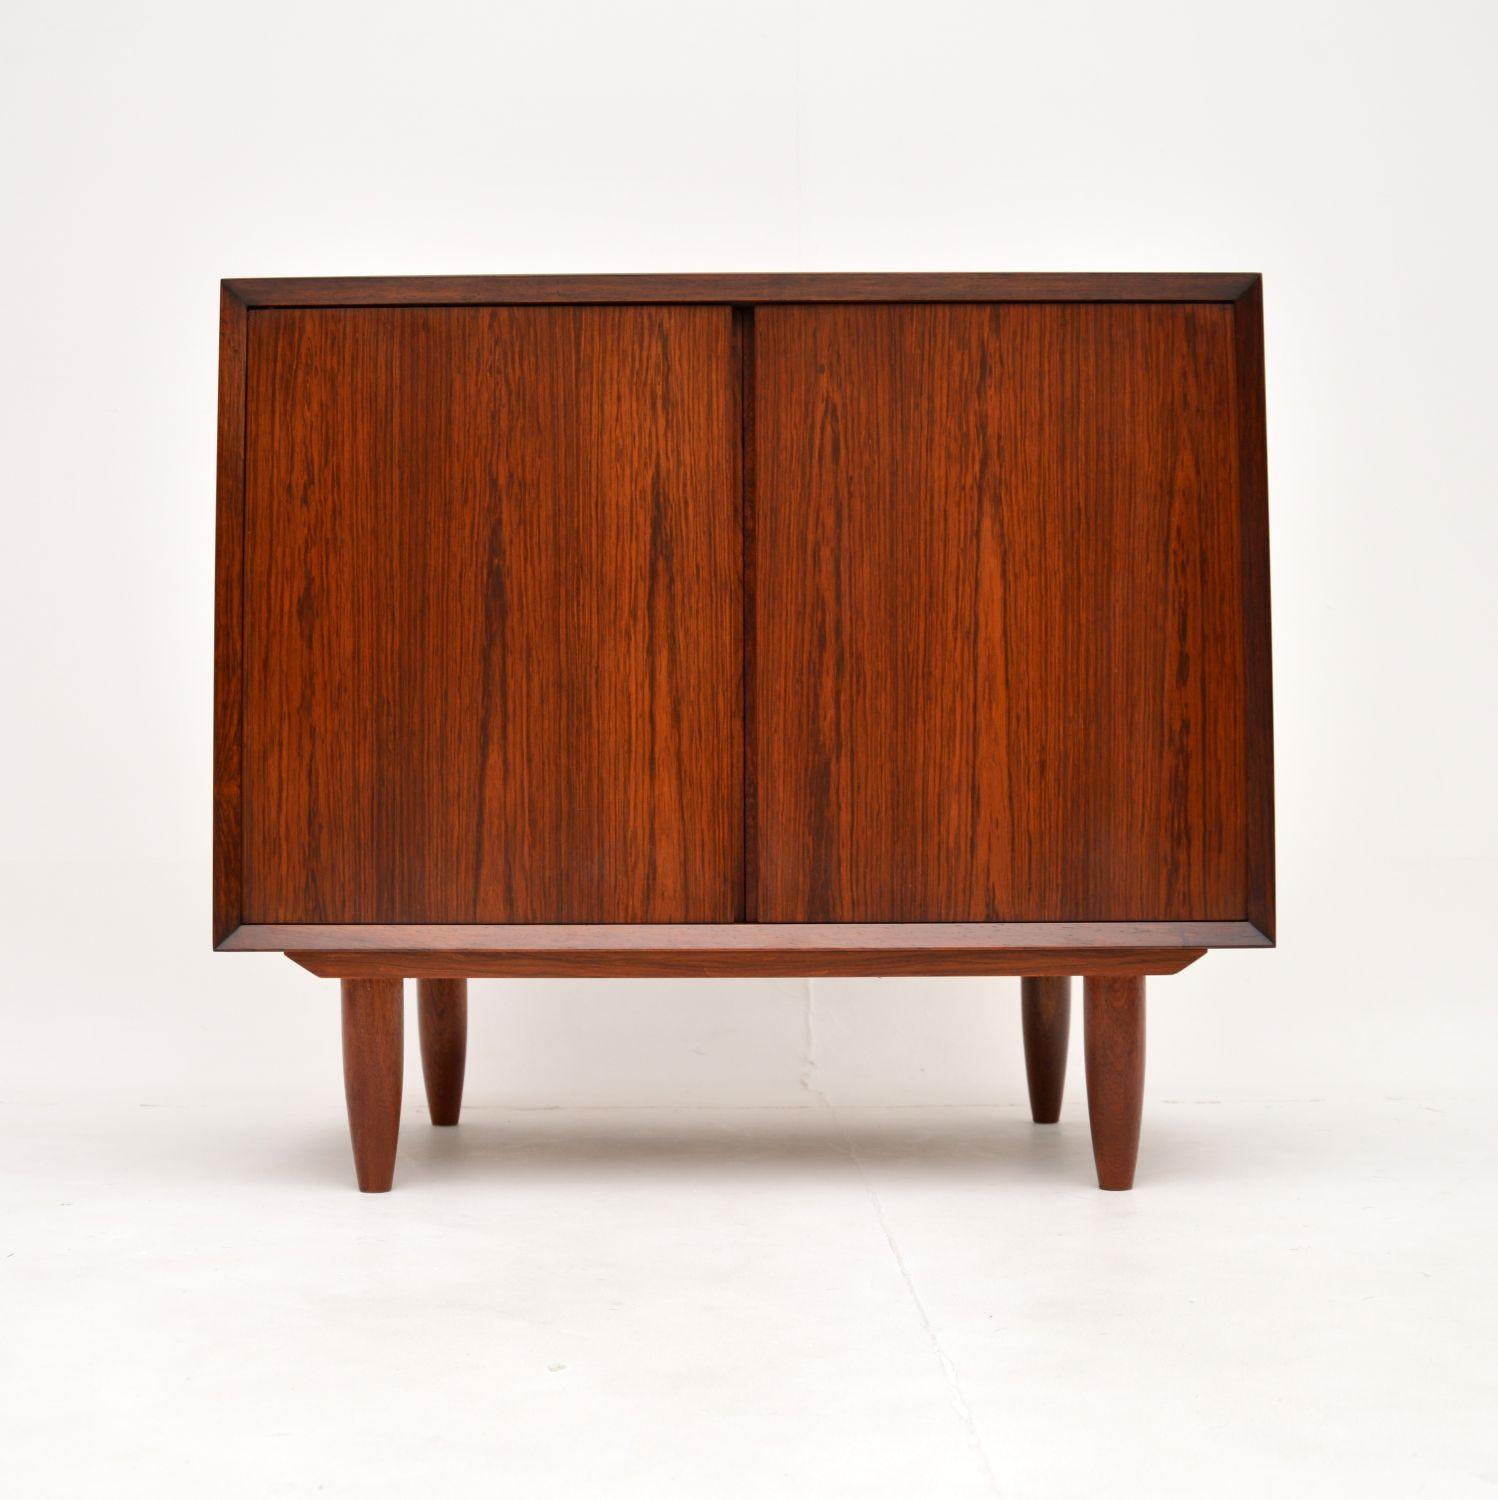 A superb vintage Danish cabinet on legs. This was designed by Poul Cadovius and was made in Denmark by Cado, it dates from the 1960’s.

The quality is outstanding, this is so well made and is a very useful size. The wood has a gorgeous colour and